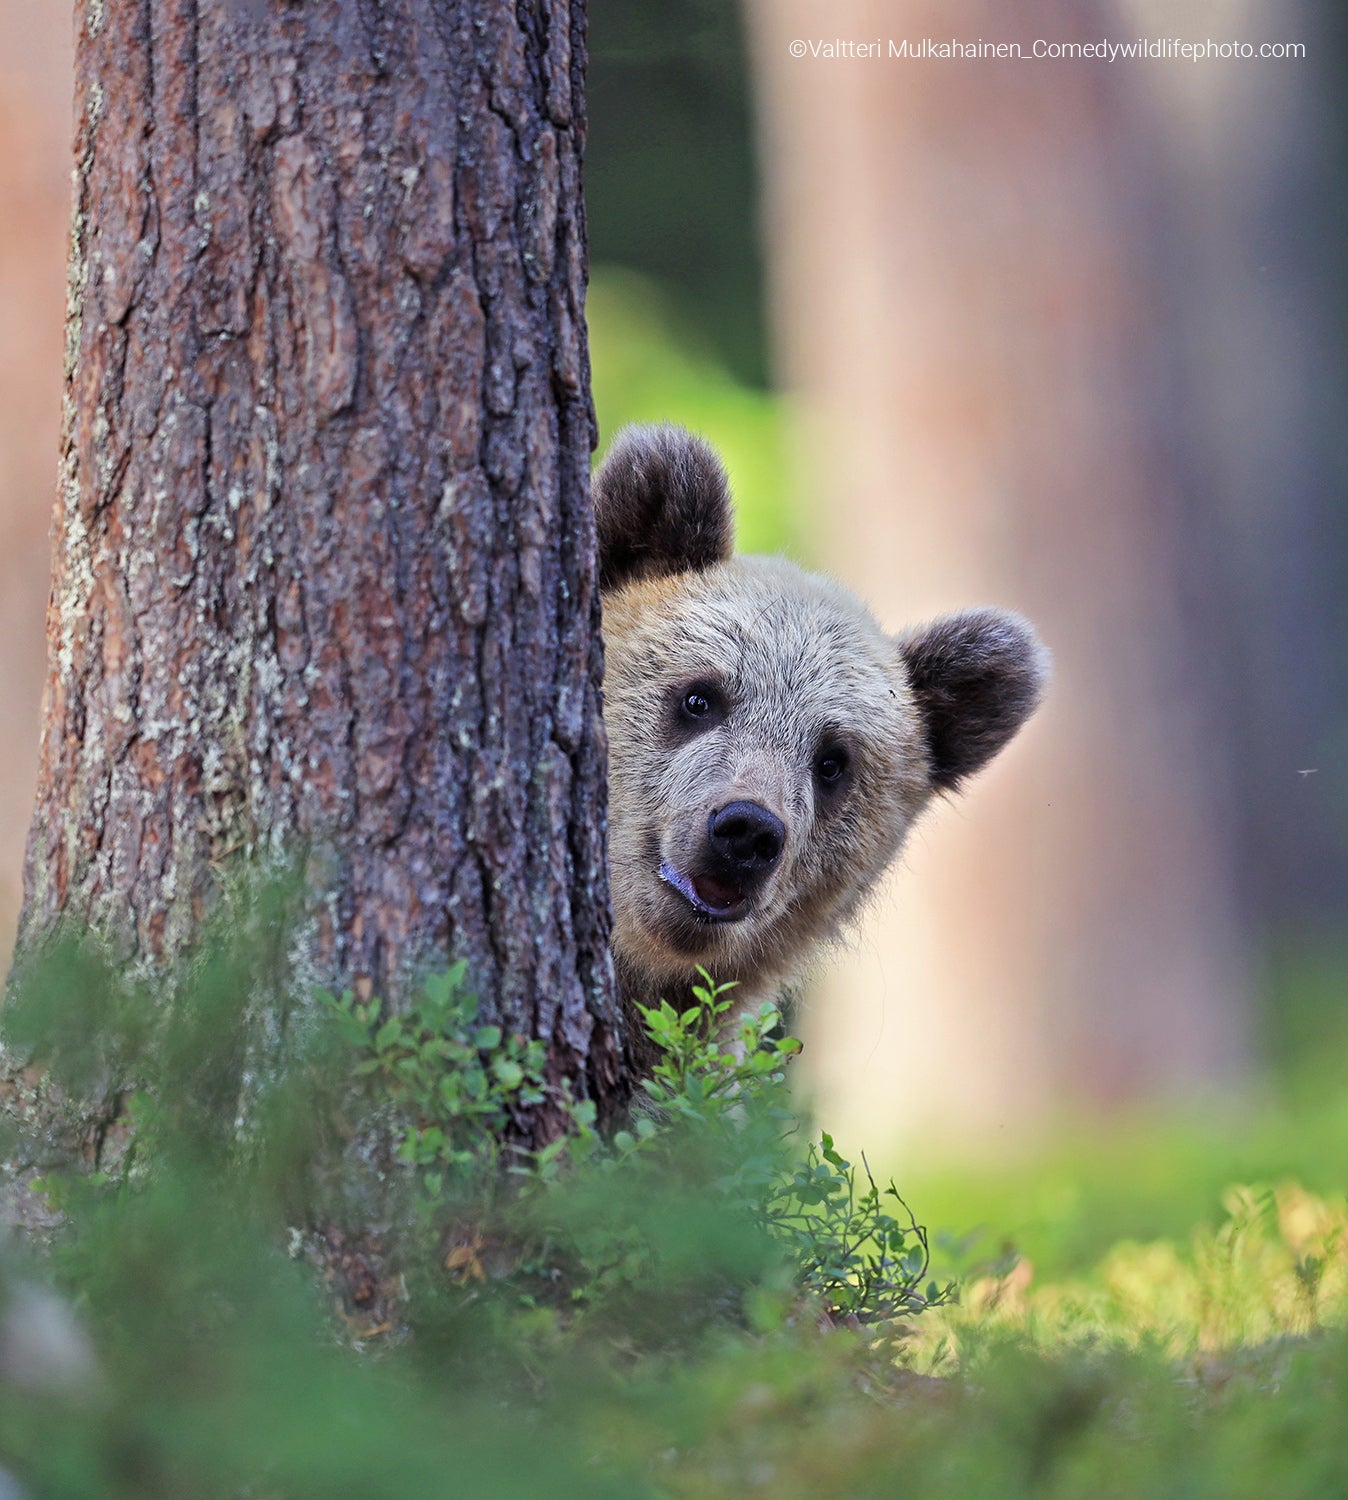 A brown bear peeks out from behind a tree. (Photo: © Valtteri Mulkahainen / Comedywildlifephoto.com.)